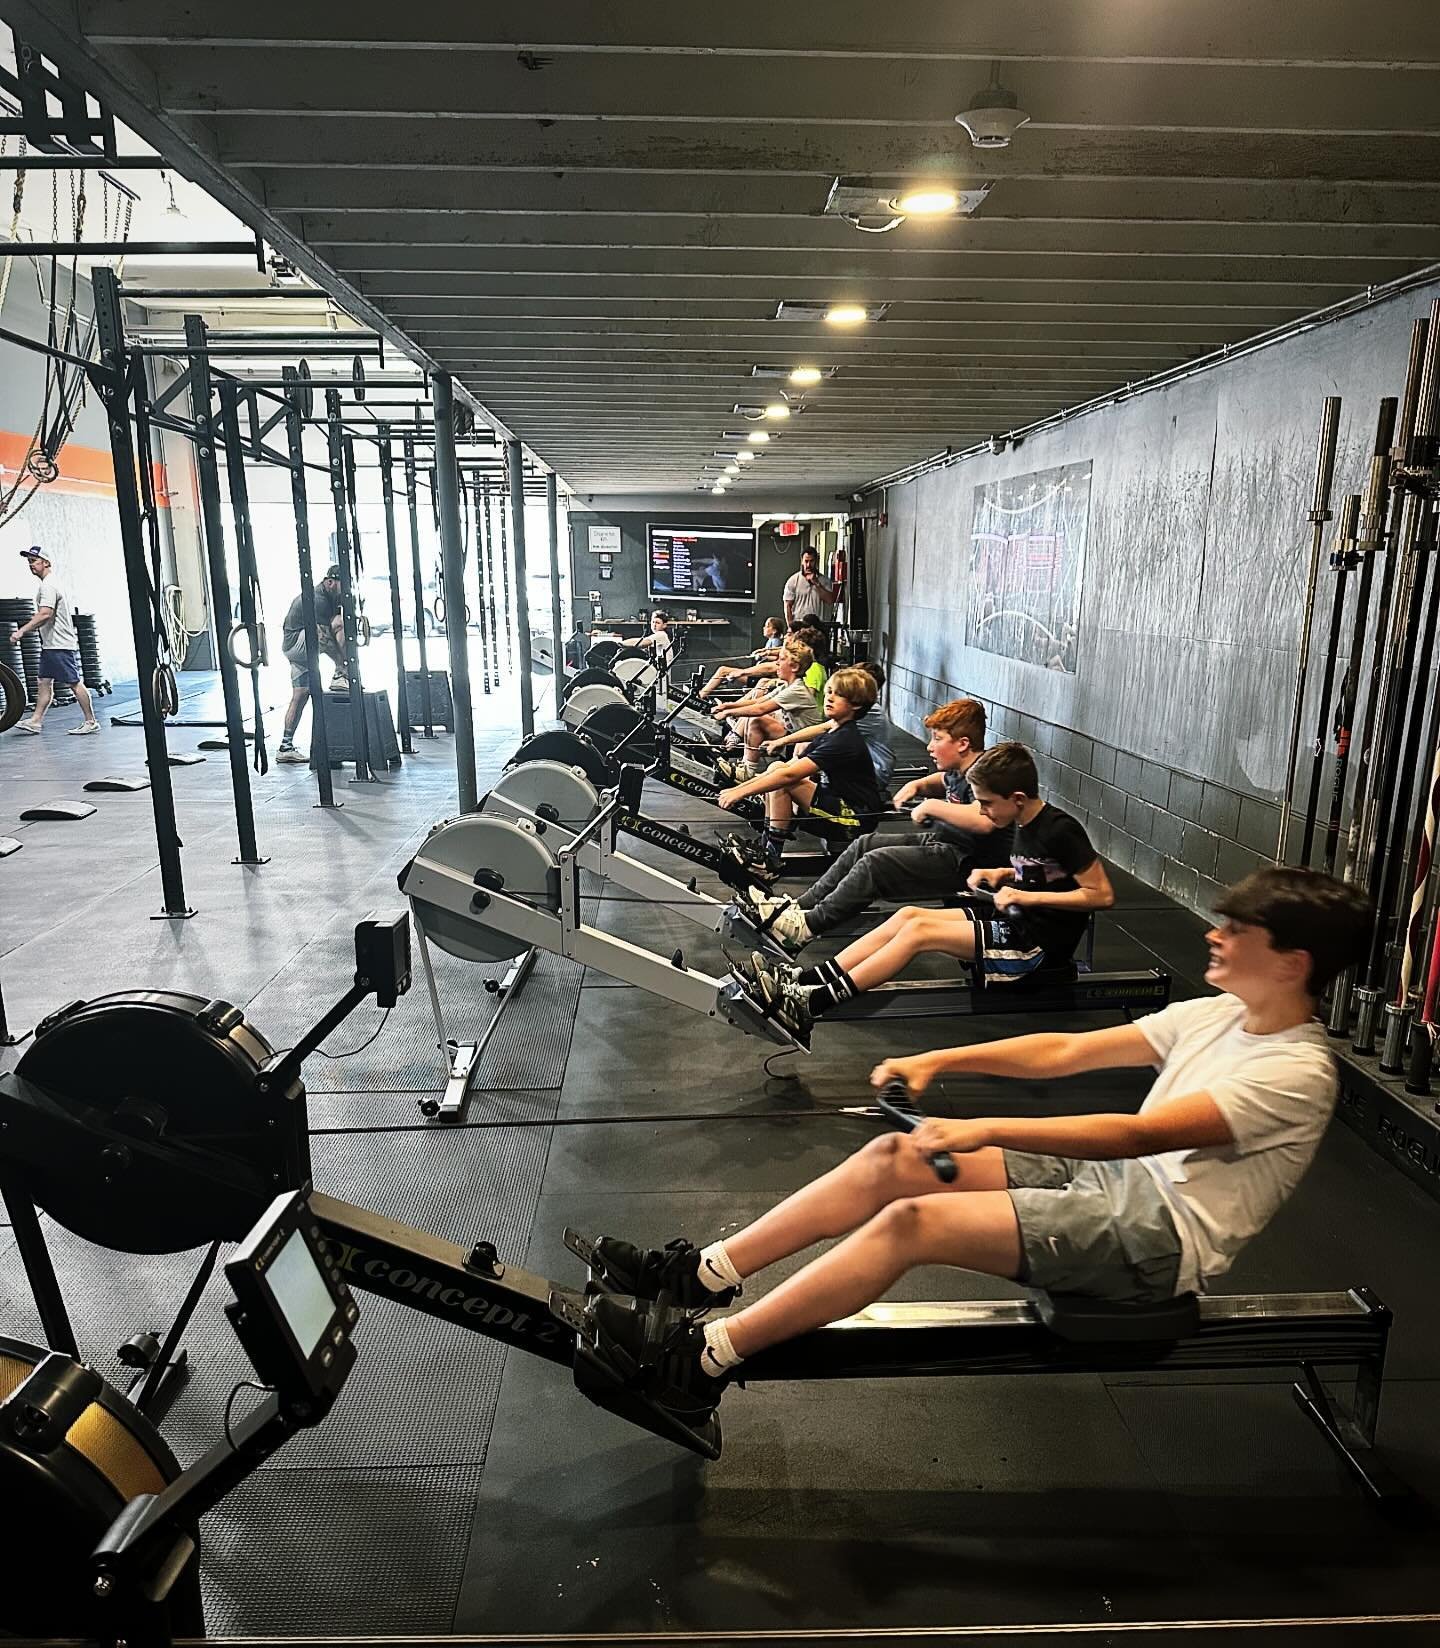 Transforming teens&rsquo; lives through fitness. Foundry Teens helps build confidence, discipline, and resilience . Bring your teen for a free class! 💪 

#Fitness #Instafit #Getfit #Fitspiration #Fitnessaddict #Fitnessmotivation #Fitnesslife #Fitnes